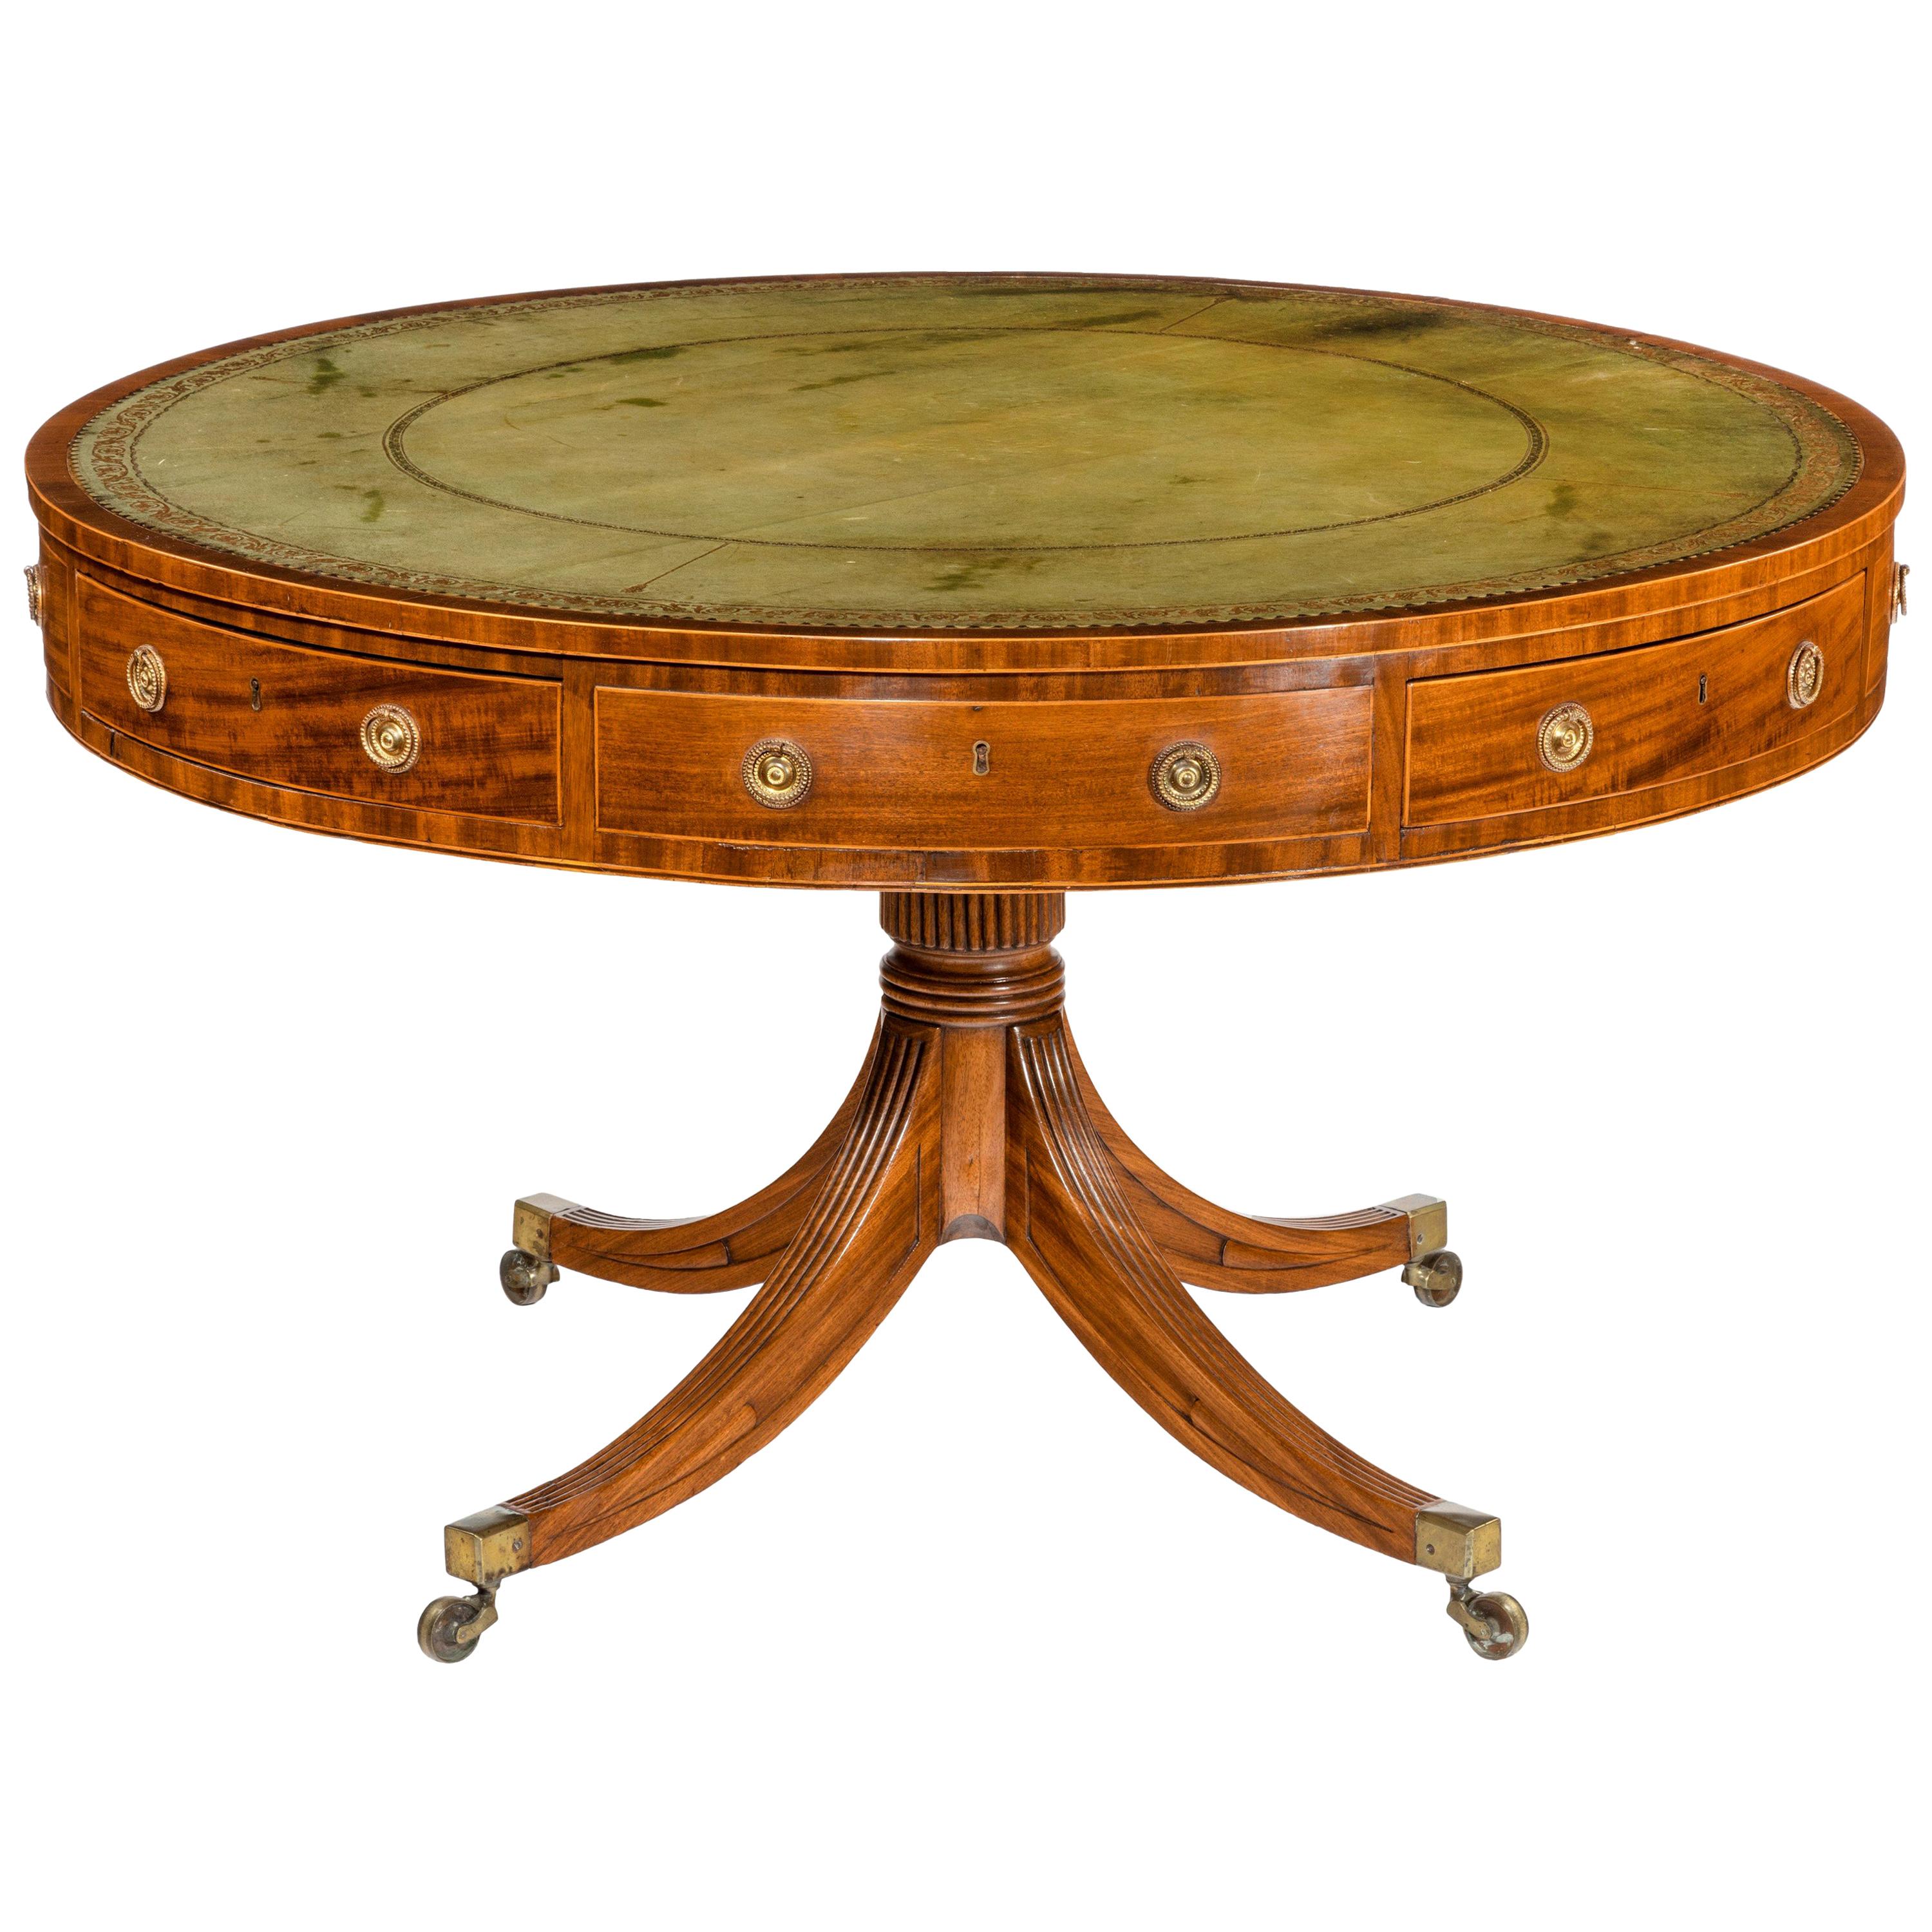 Late George III Revolving Mahogany Drum Table Attributed to Gillows